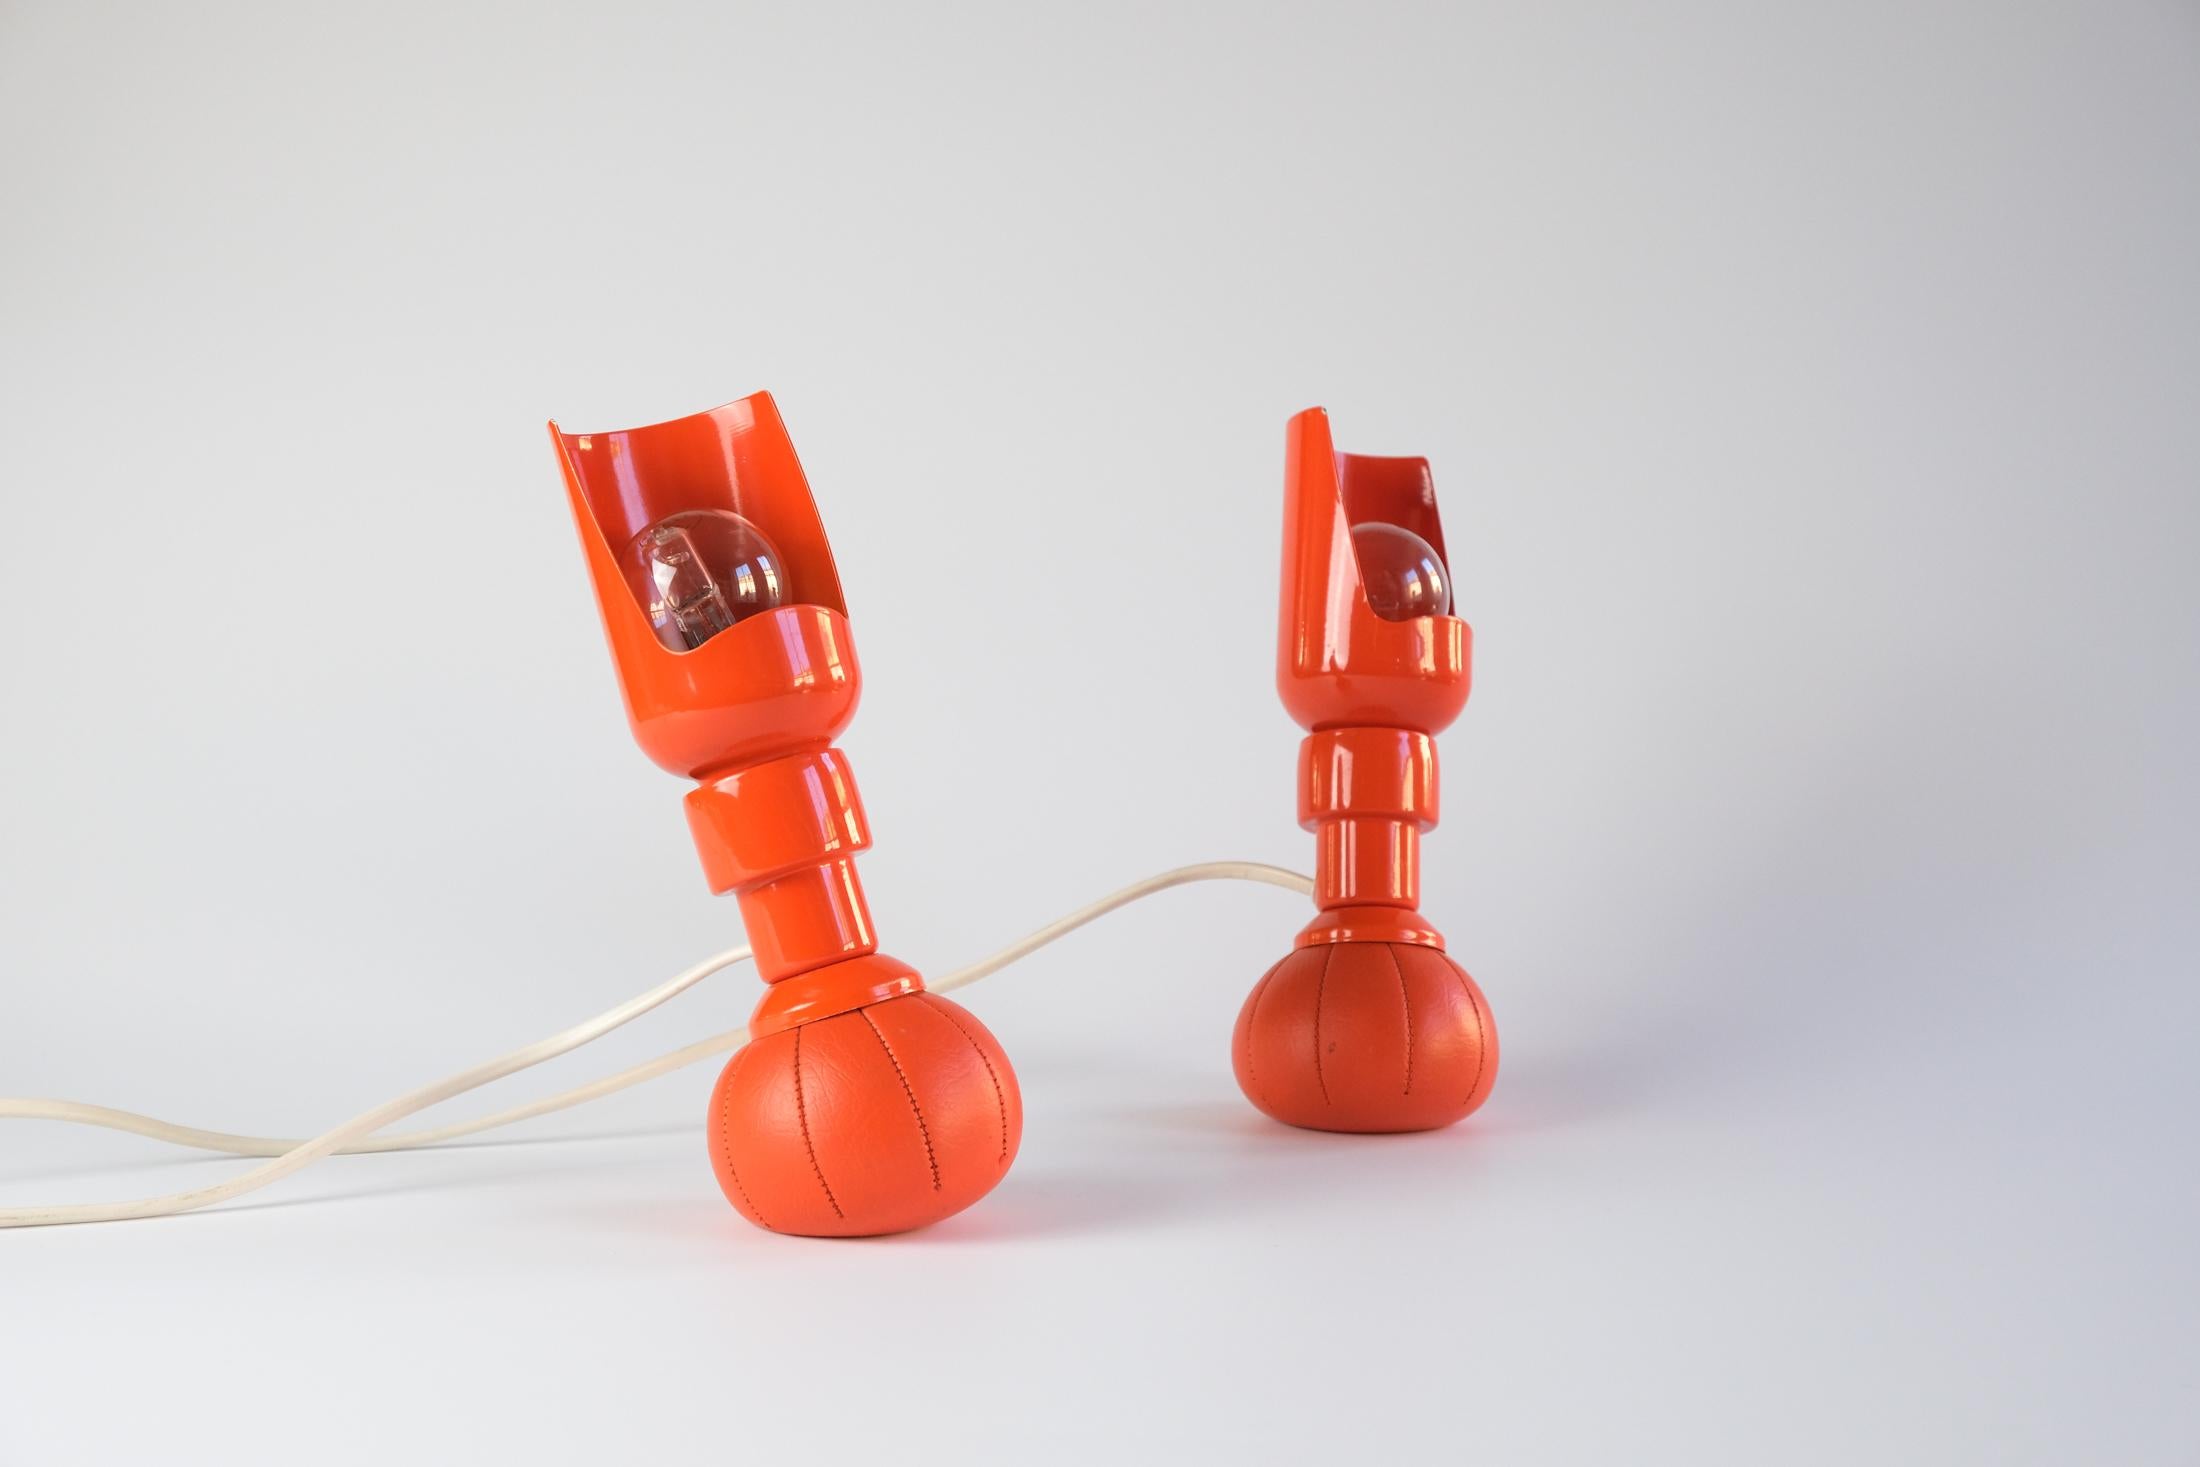 Rare Pair of Mid-Century Gino Sarfatti Model 600P Lamps for Arteluce, Italy 1966 For Sale 9